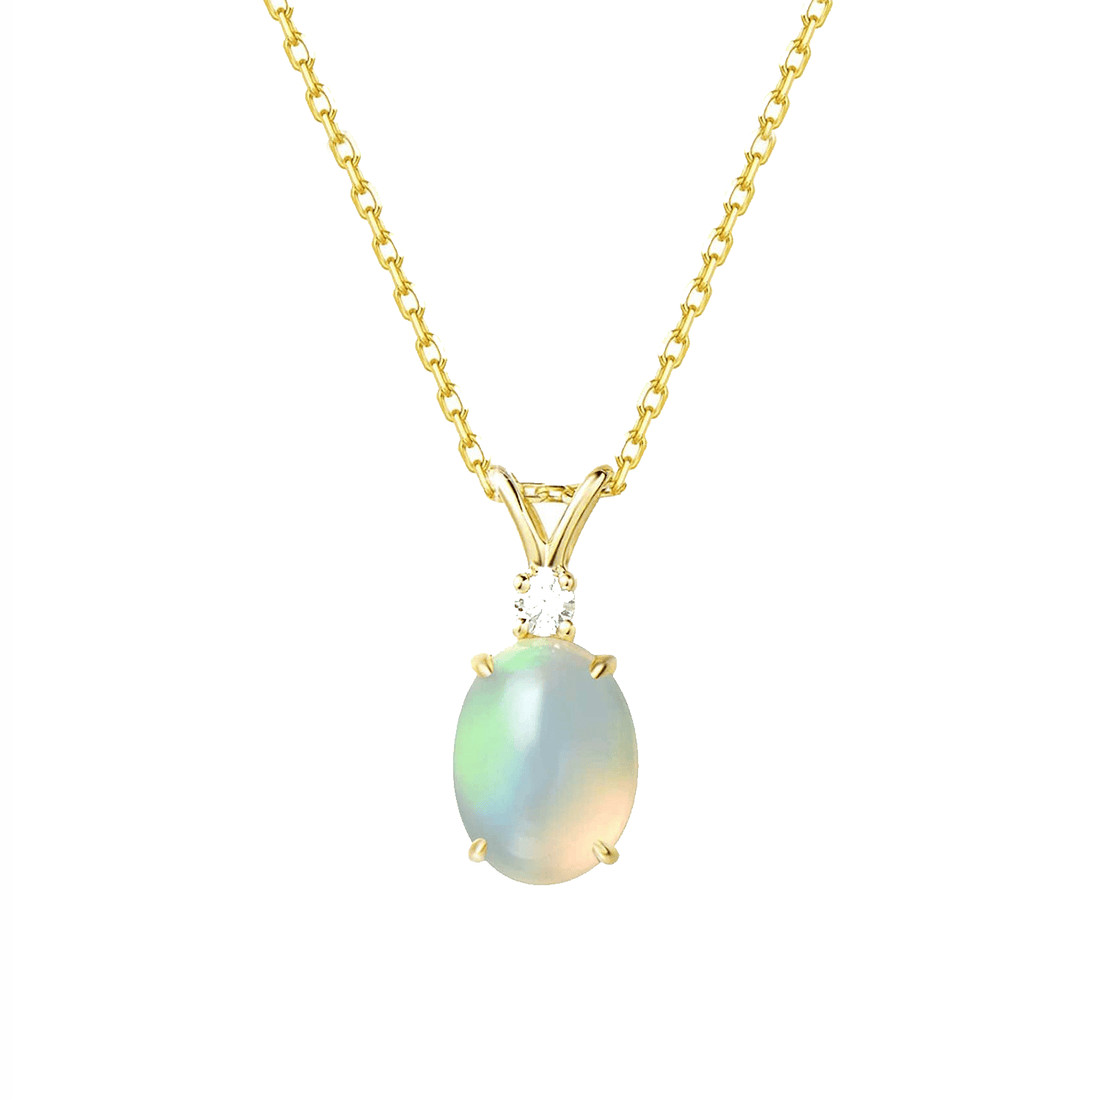 Natural oval shape opal stone pendant necklace with white diamond in 14k yellow gold